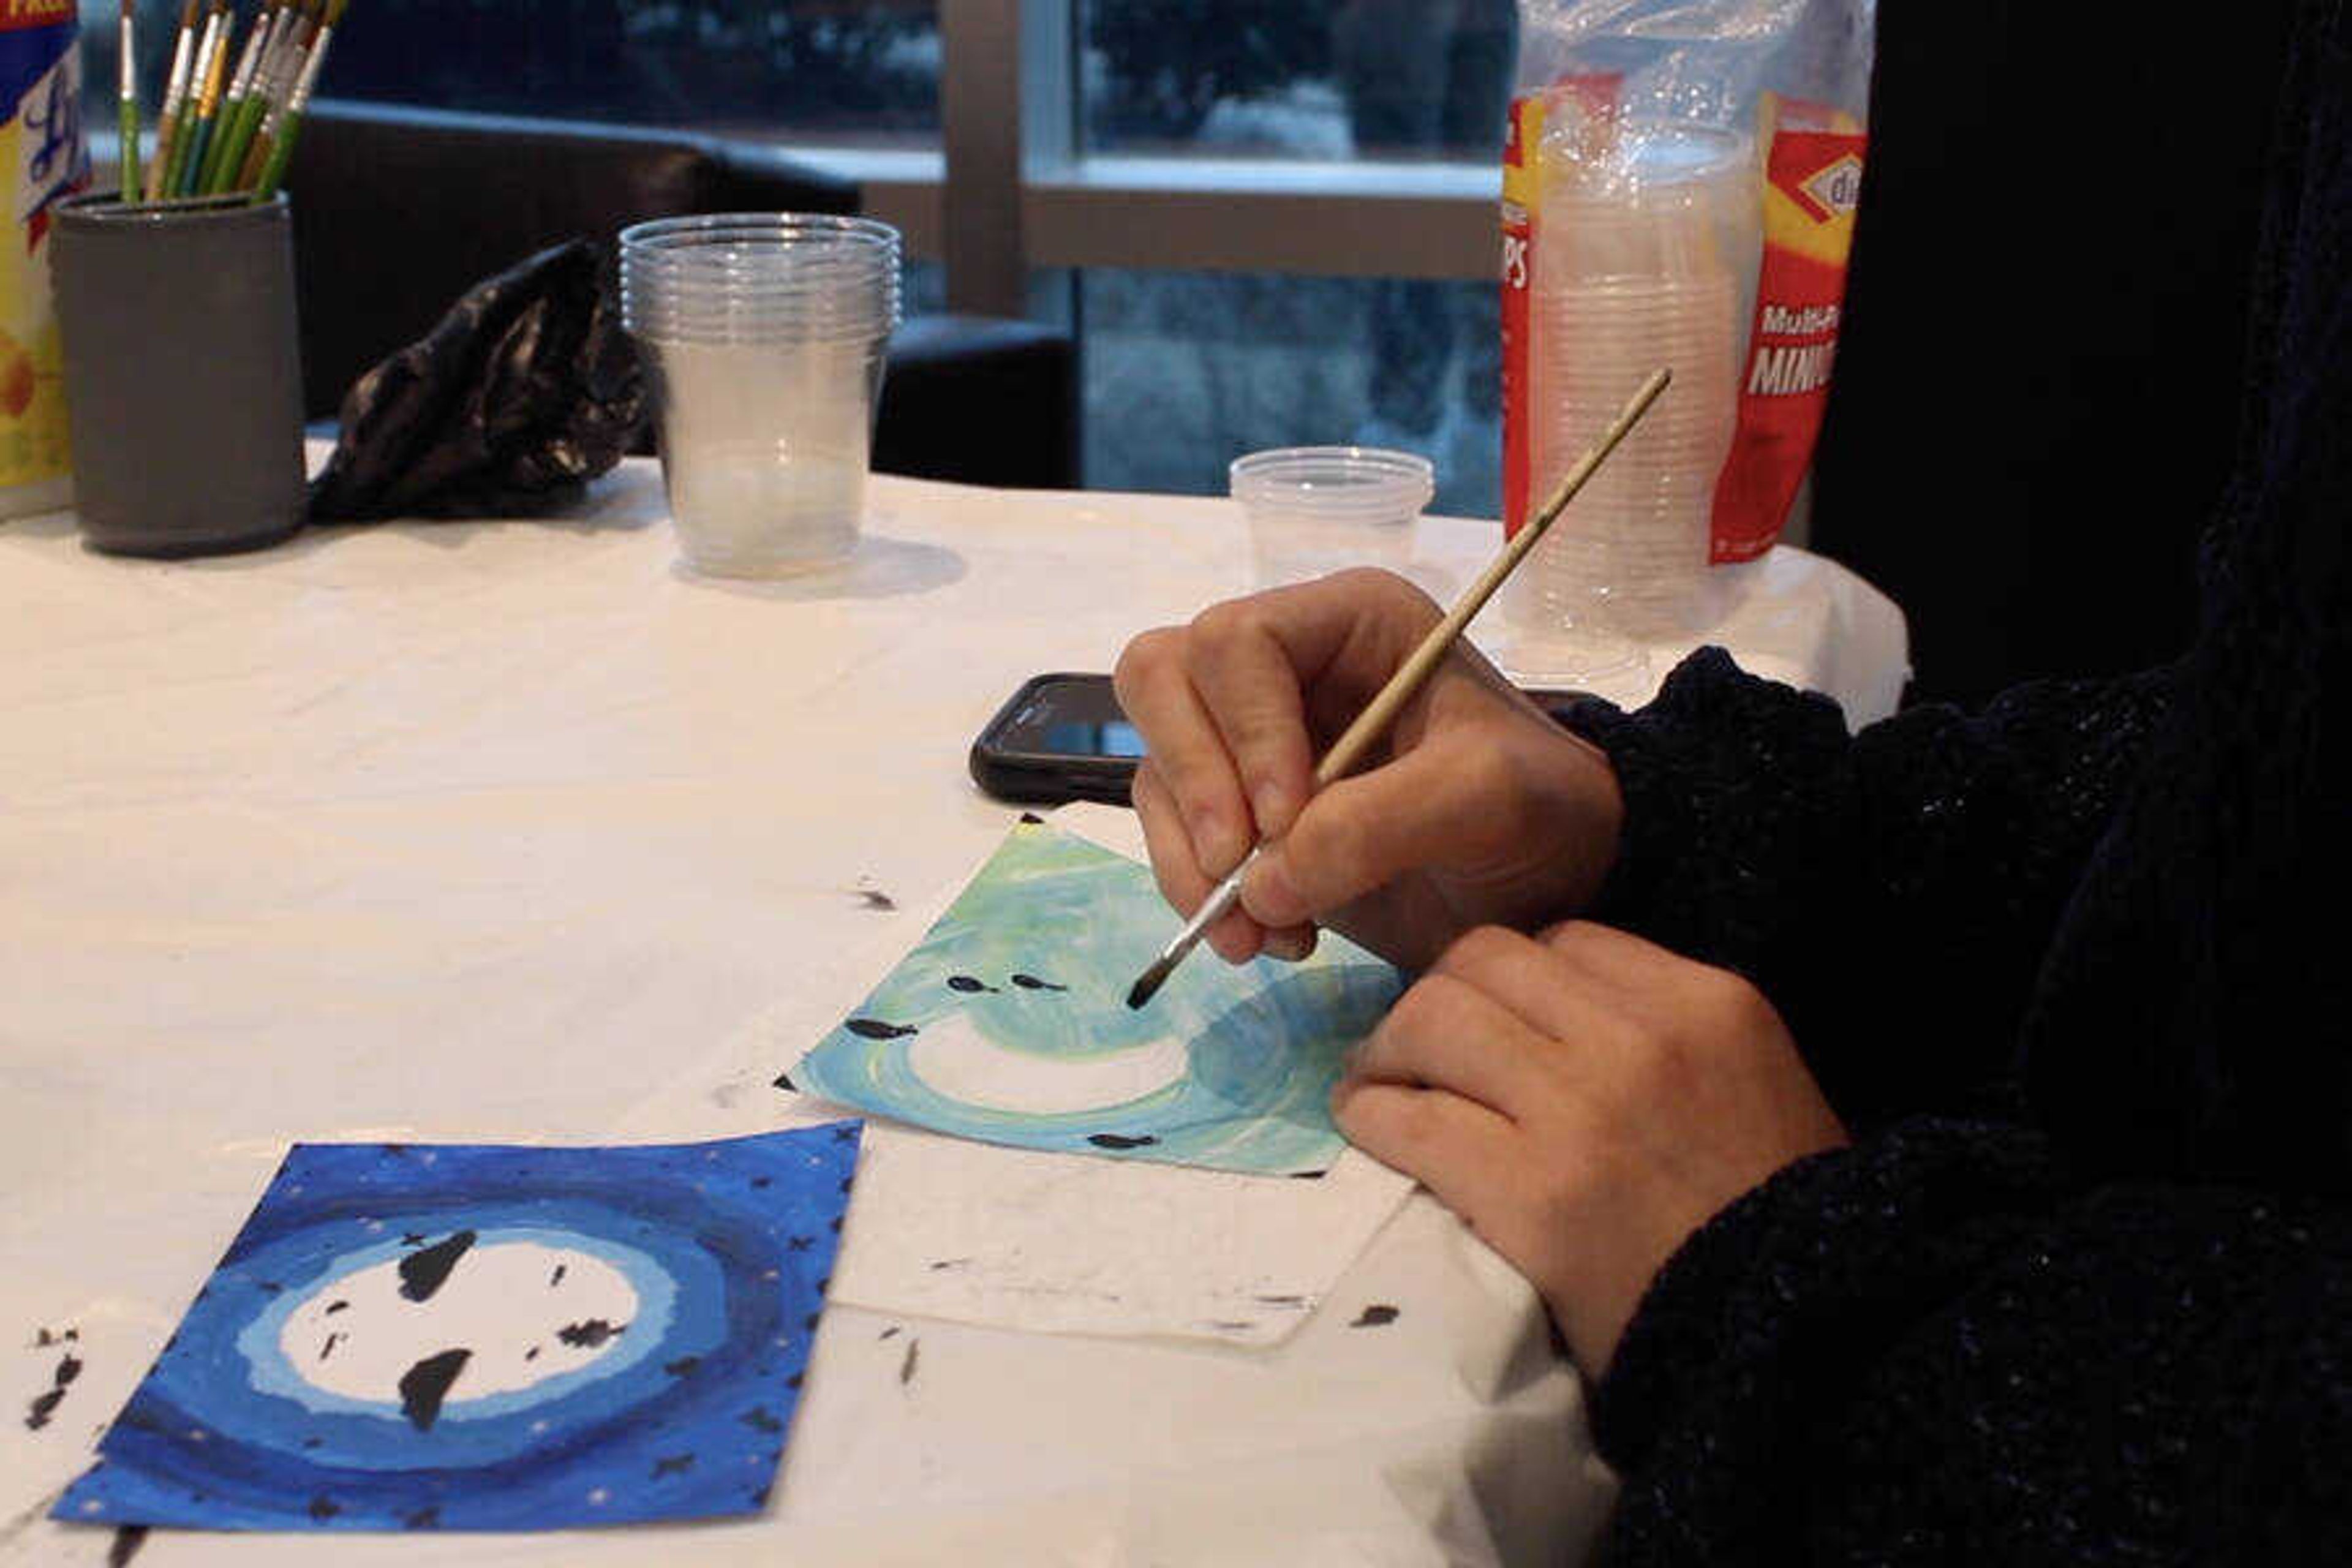 An attendee at the Crisp Museum Heritage Day participates in the moon painting activity.
